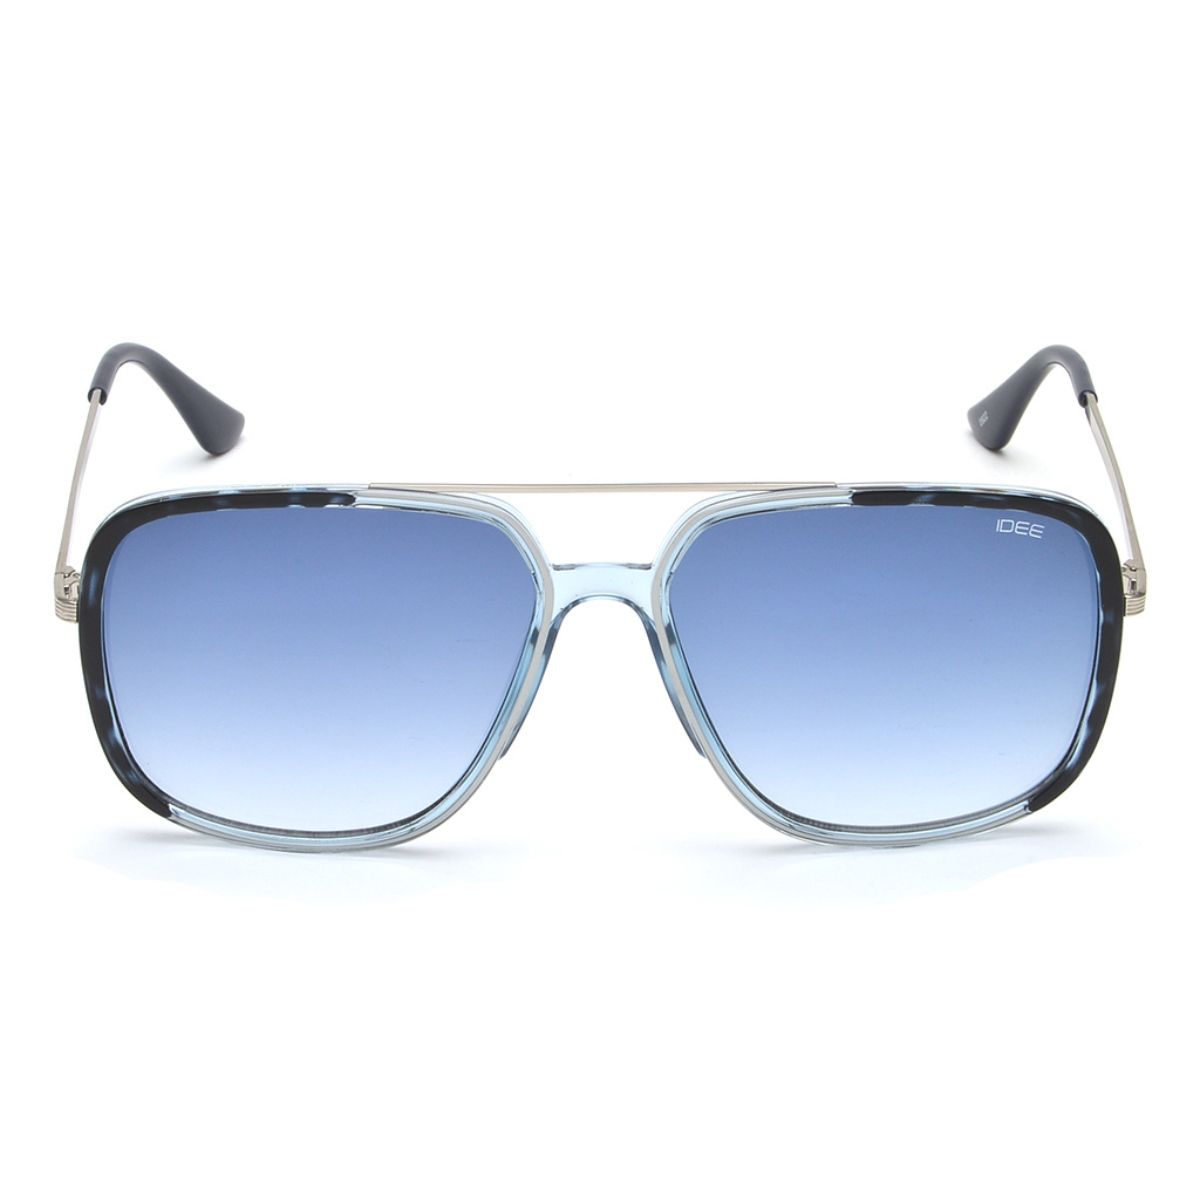 Buy Gorgeous blue-tinted sunglasses for women Online. – Odette